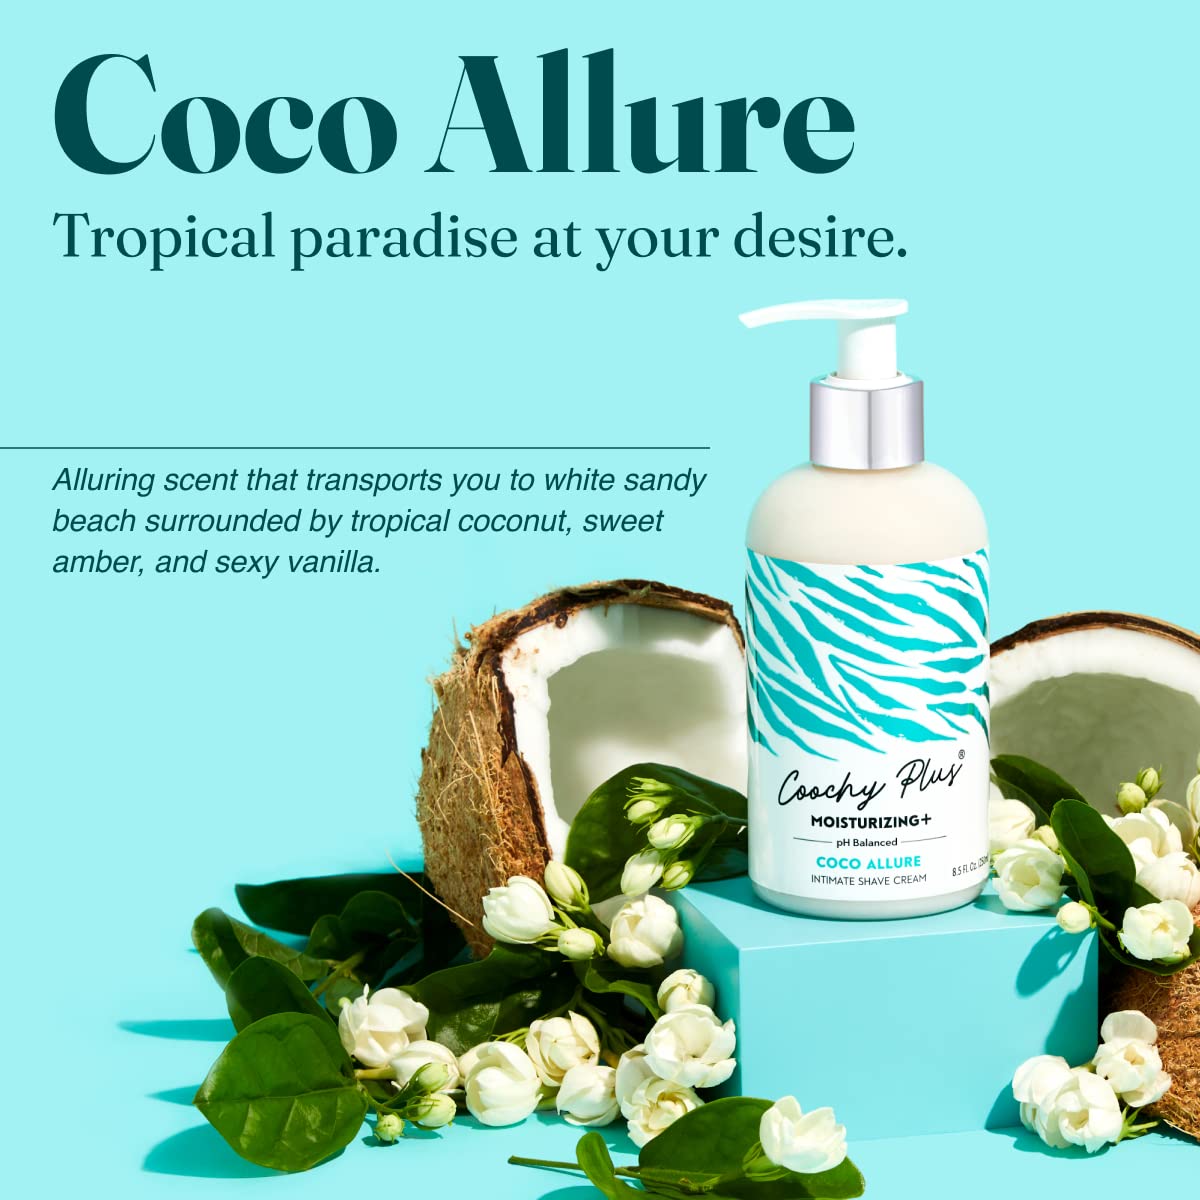 Coochy Plus Intimate Shaving Cream COCO ALLURE For Pubic, Bikini Line, Armpit and more - Rash-Free With Patent-Pending MOISTURIZING+ Formula – Prevents Razor Burns & Bumps, In-Grown Hairs, Itchiness